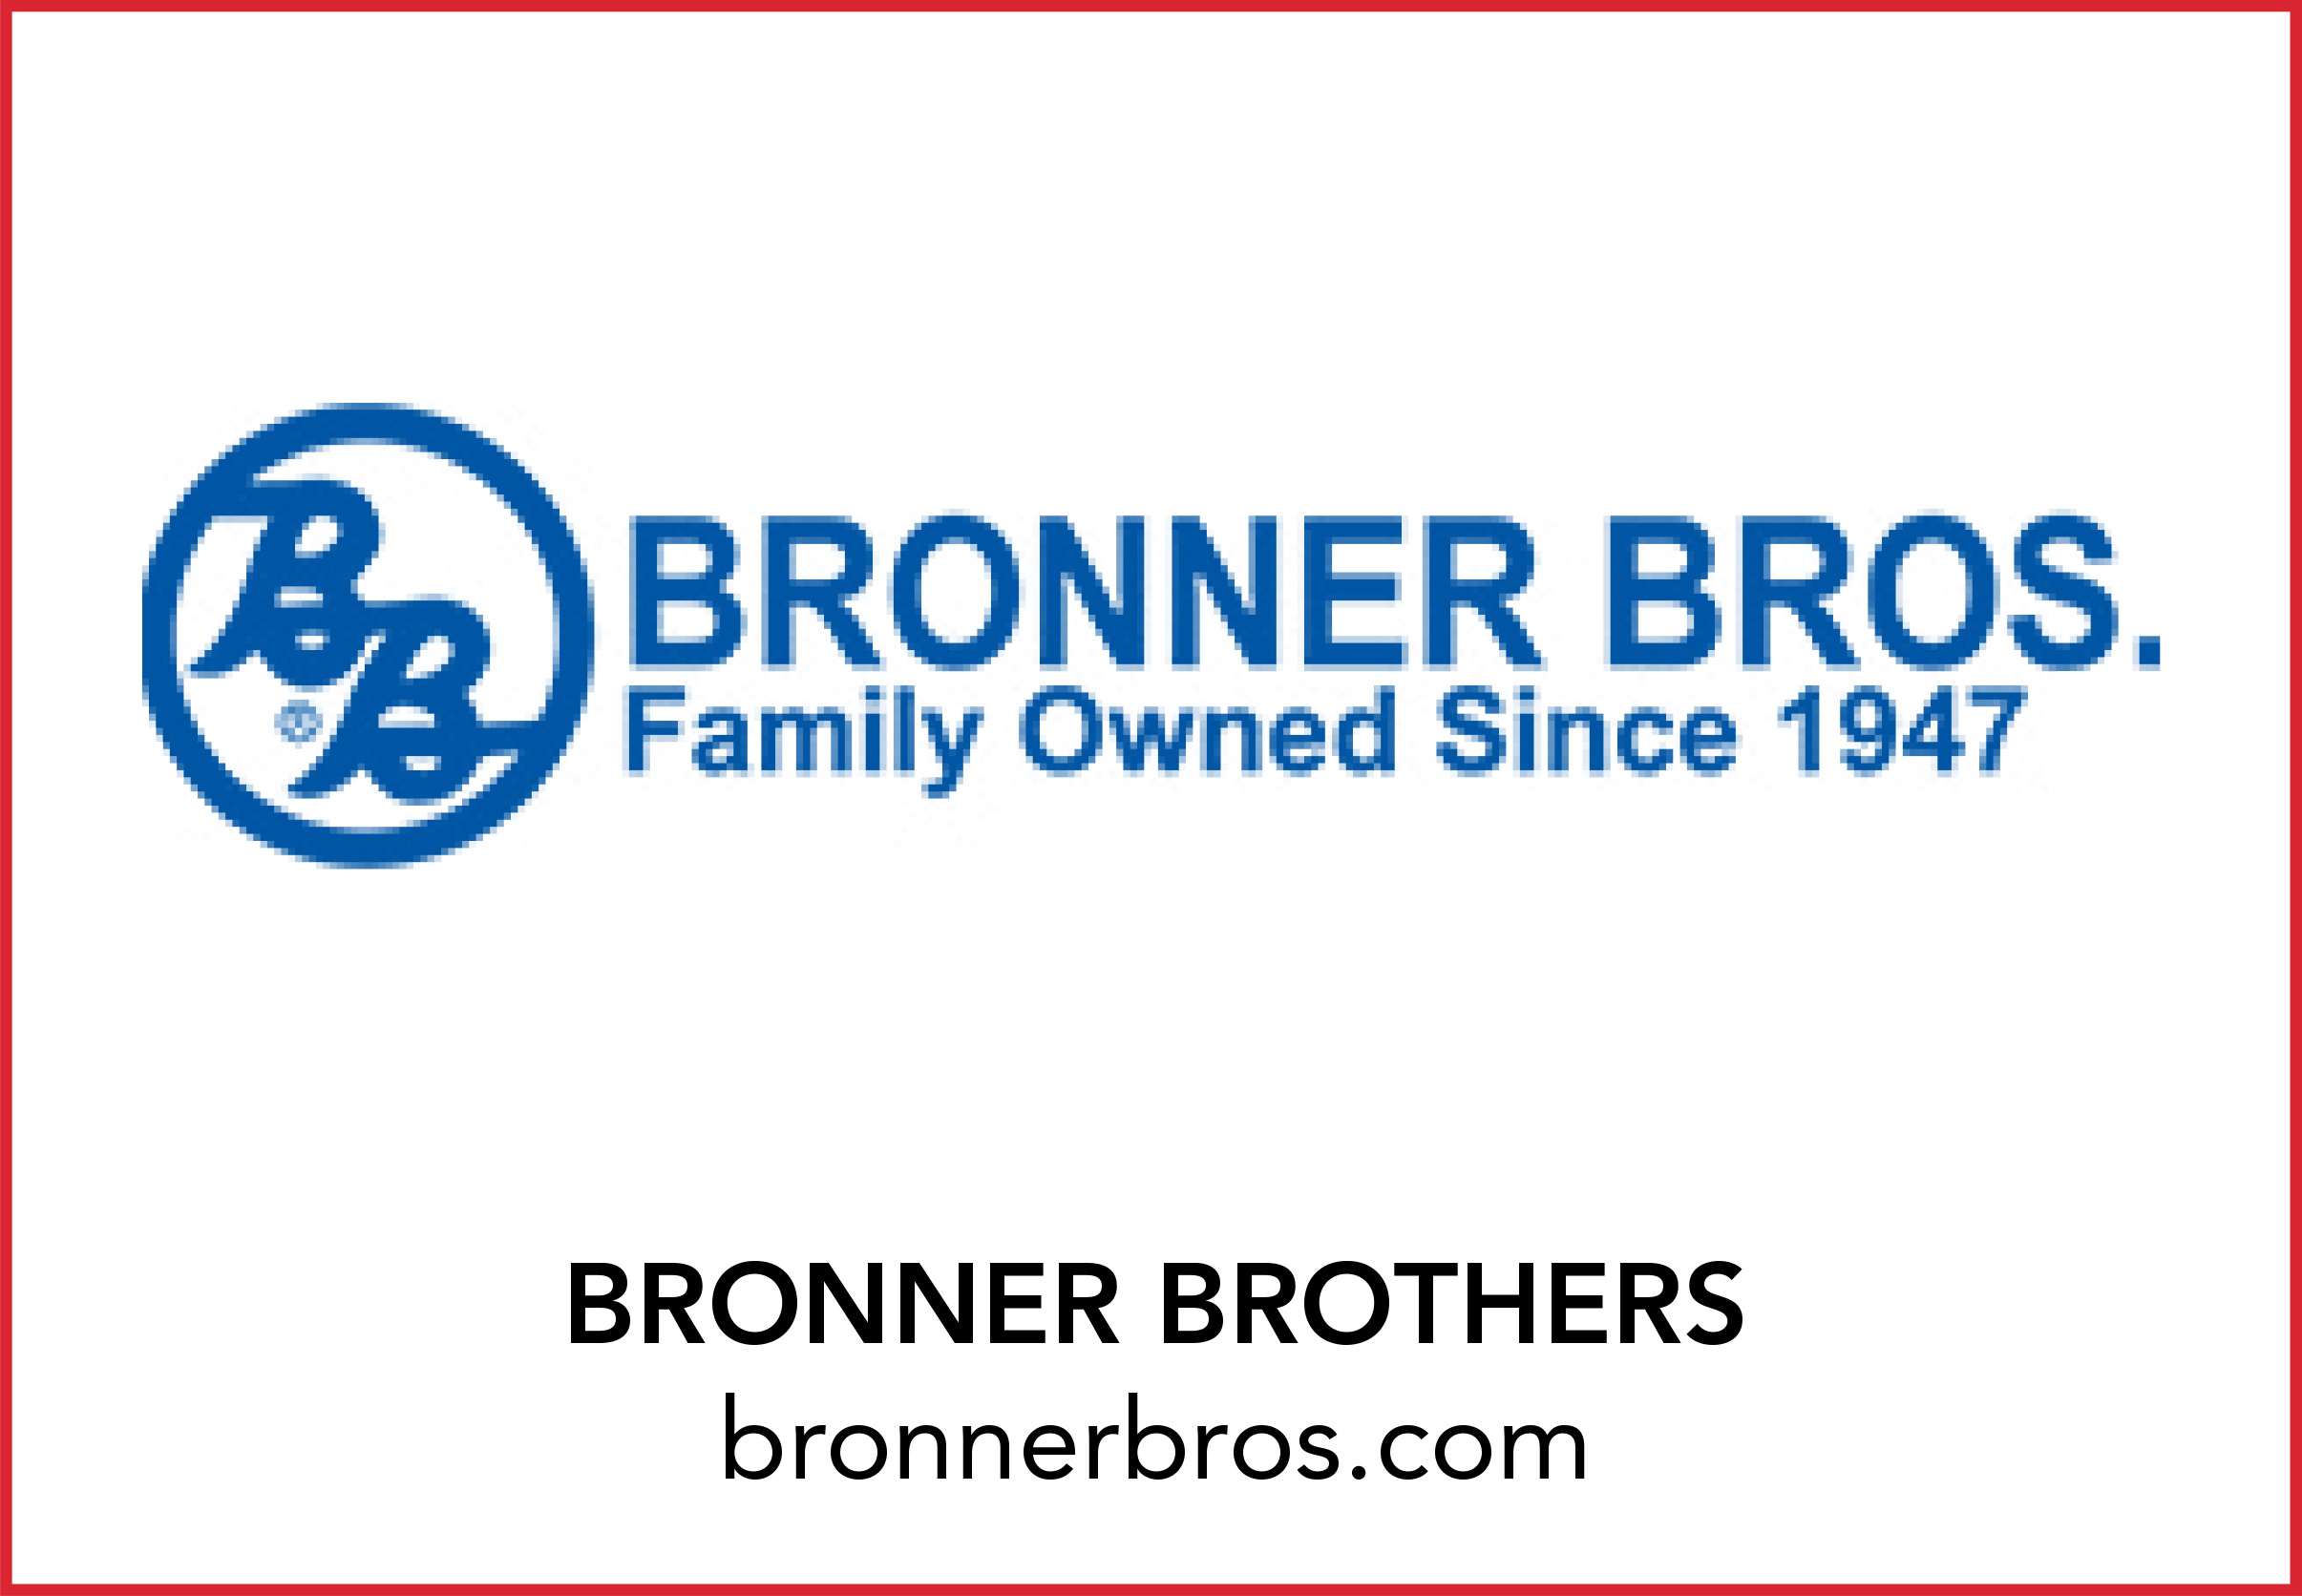 BRONNER BROTHERS